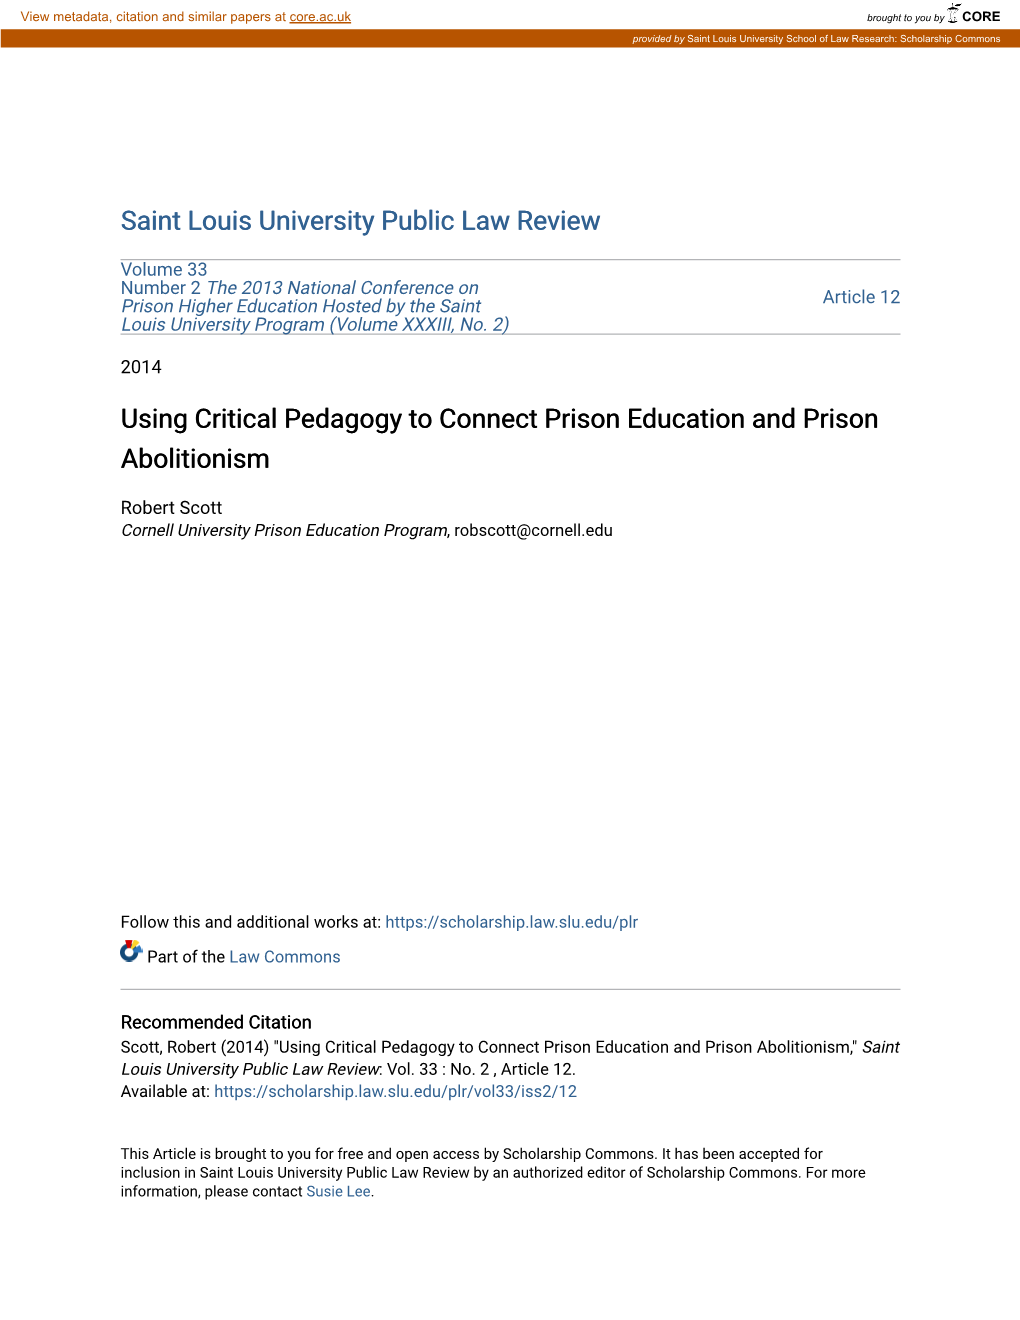 Using Critical Pedagogy to Connect Prison Education and Prison Abolitionism